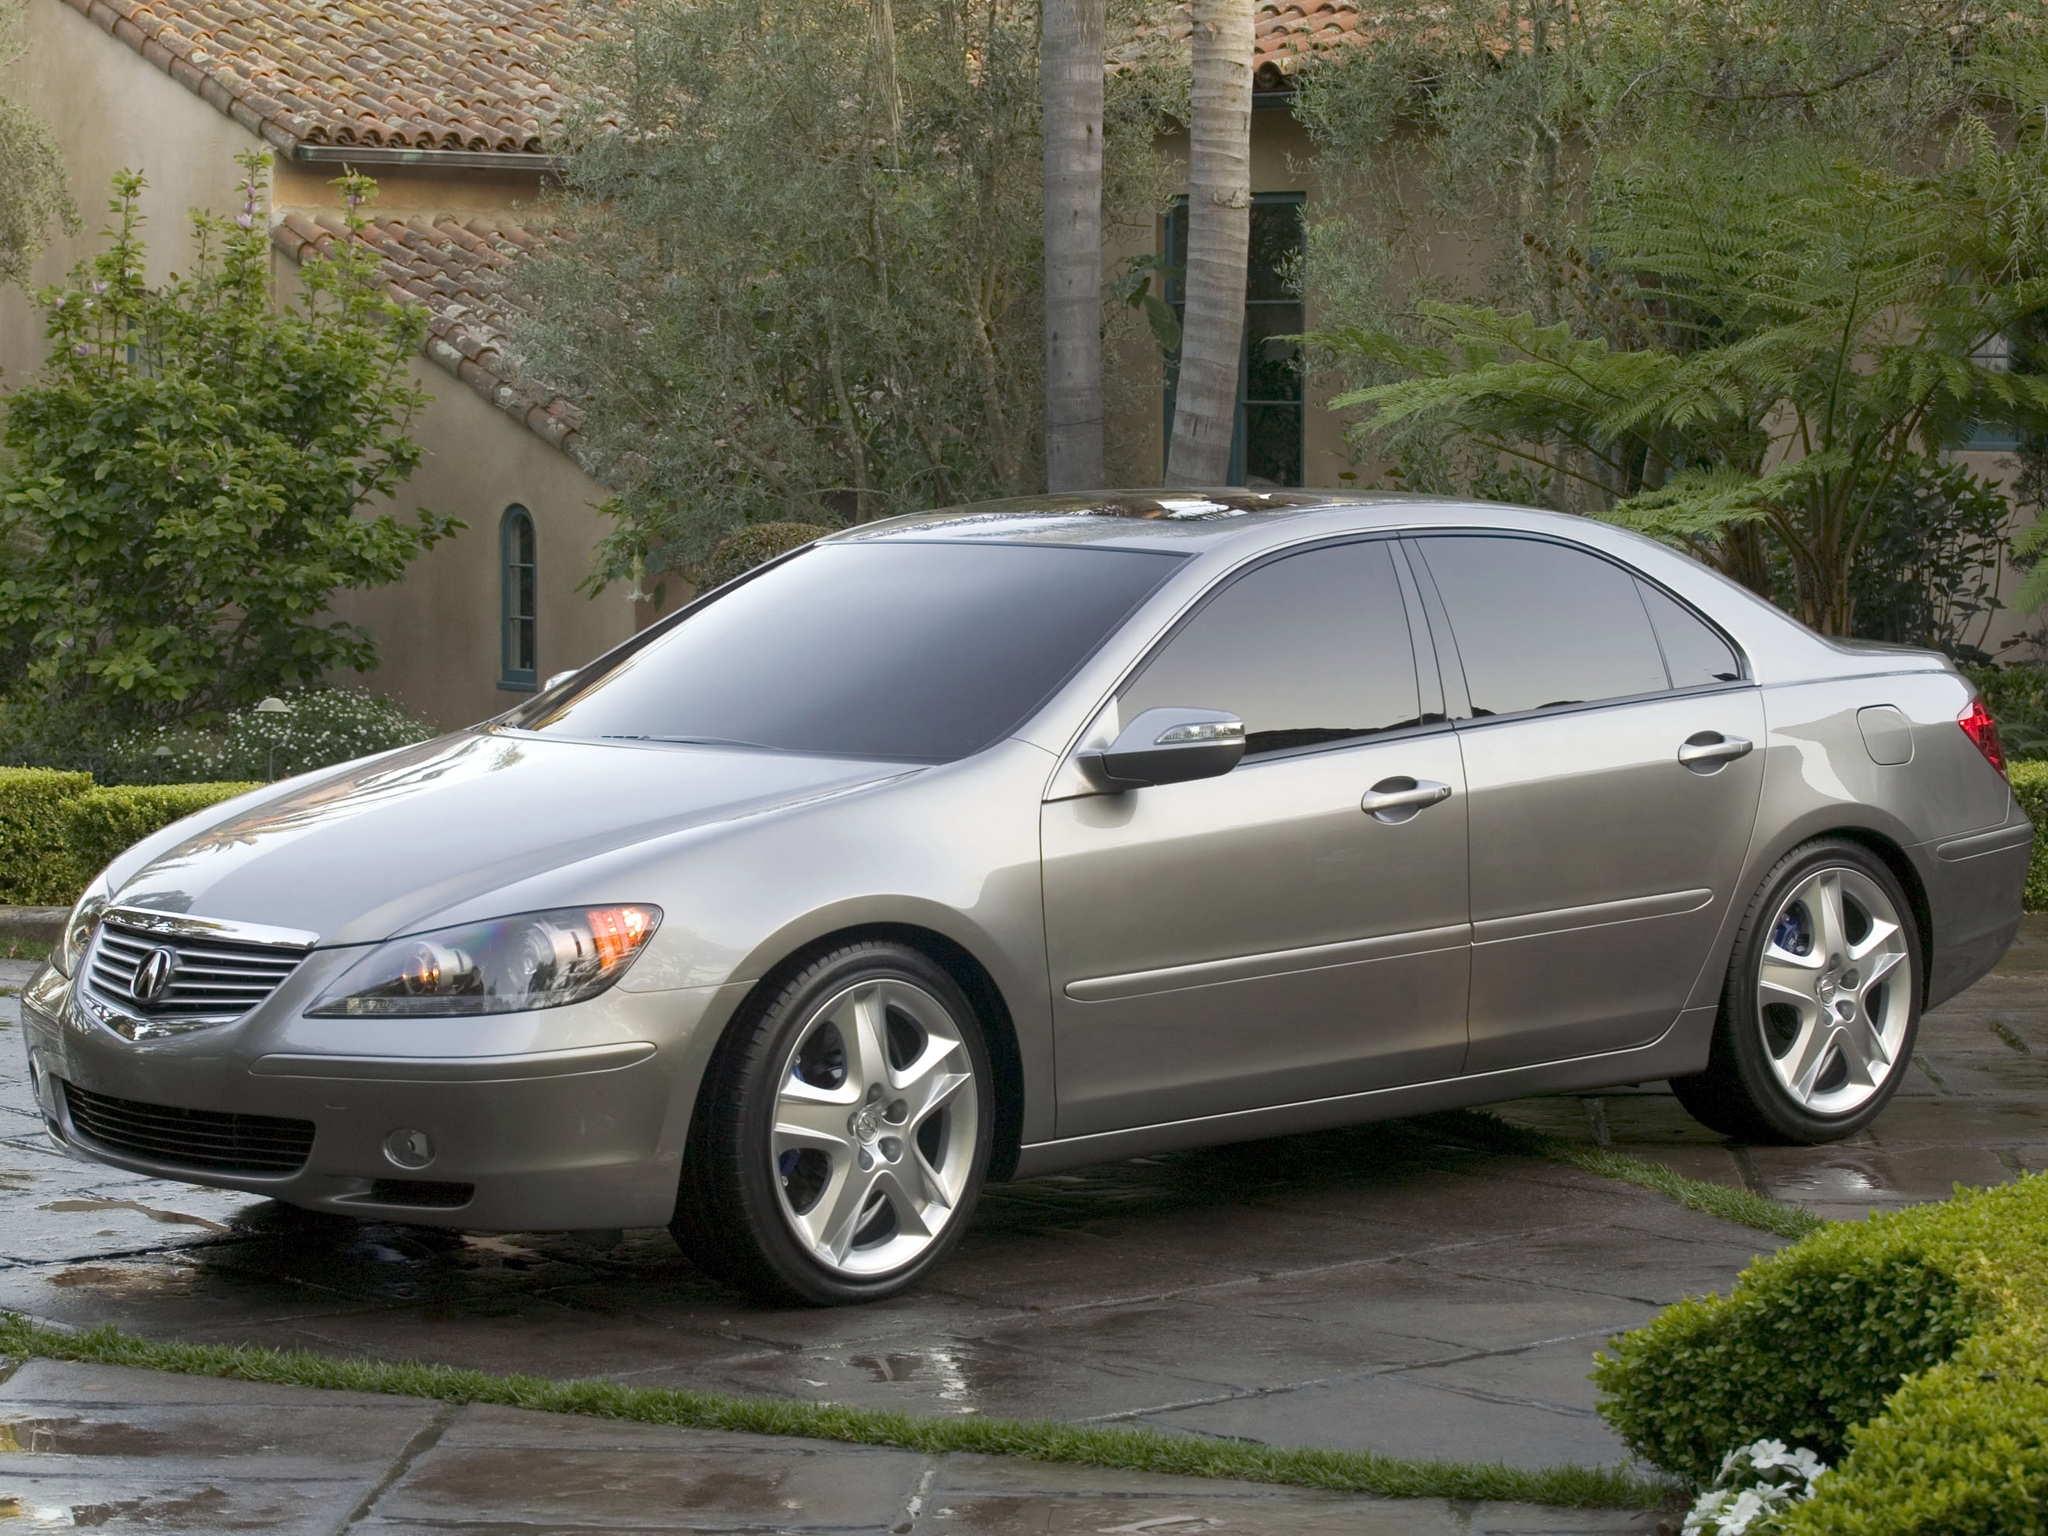 auto, nature, trees, grass, acura, cars, building, reflection, grey, concept, side view, style, akura, 2004, concept car, rl